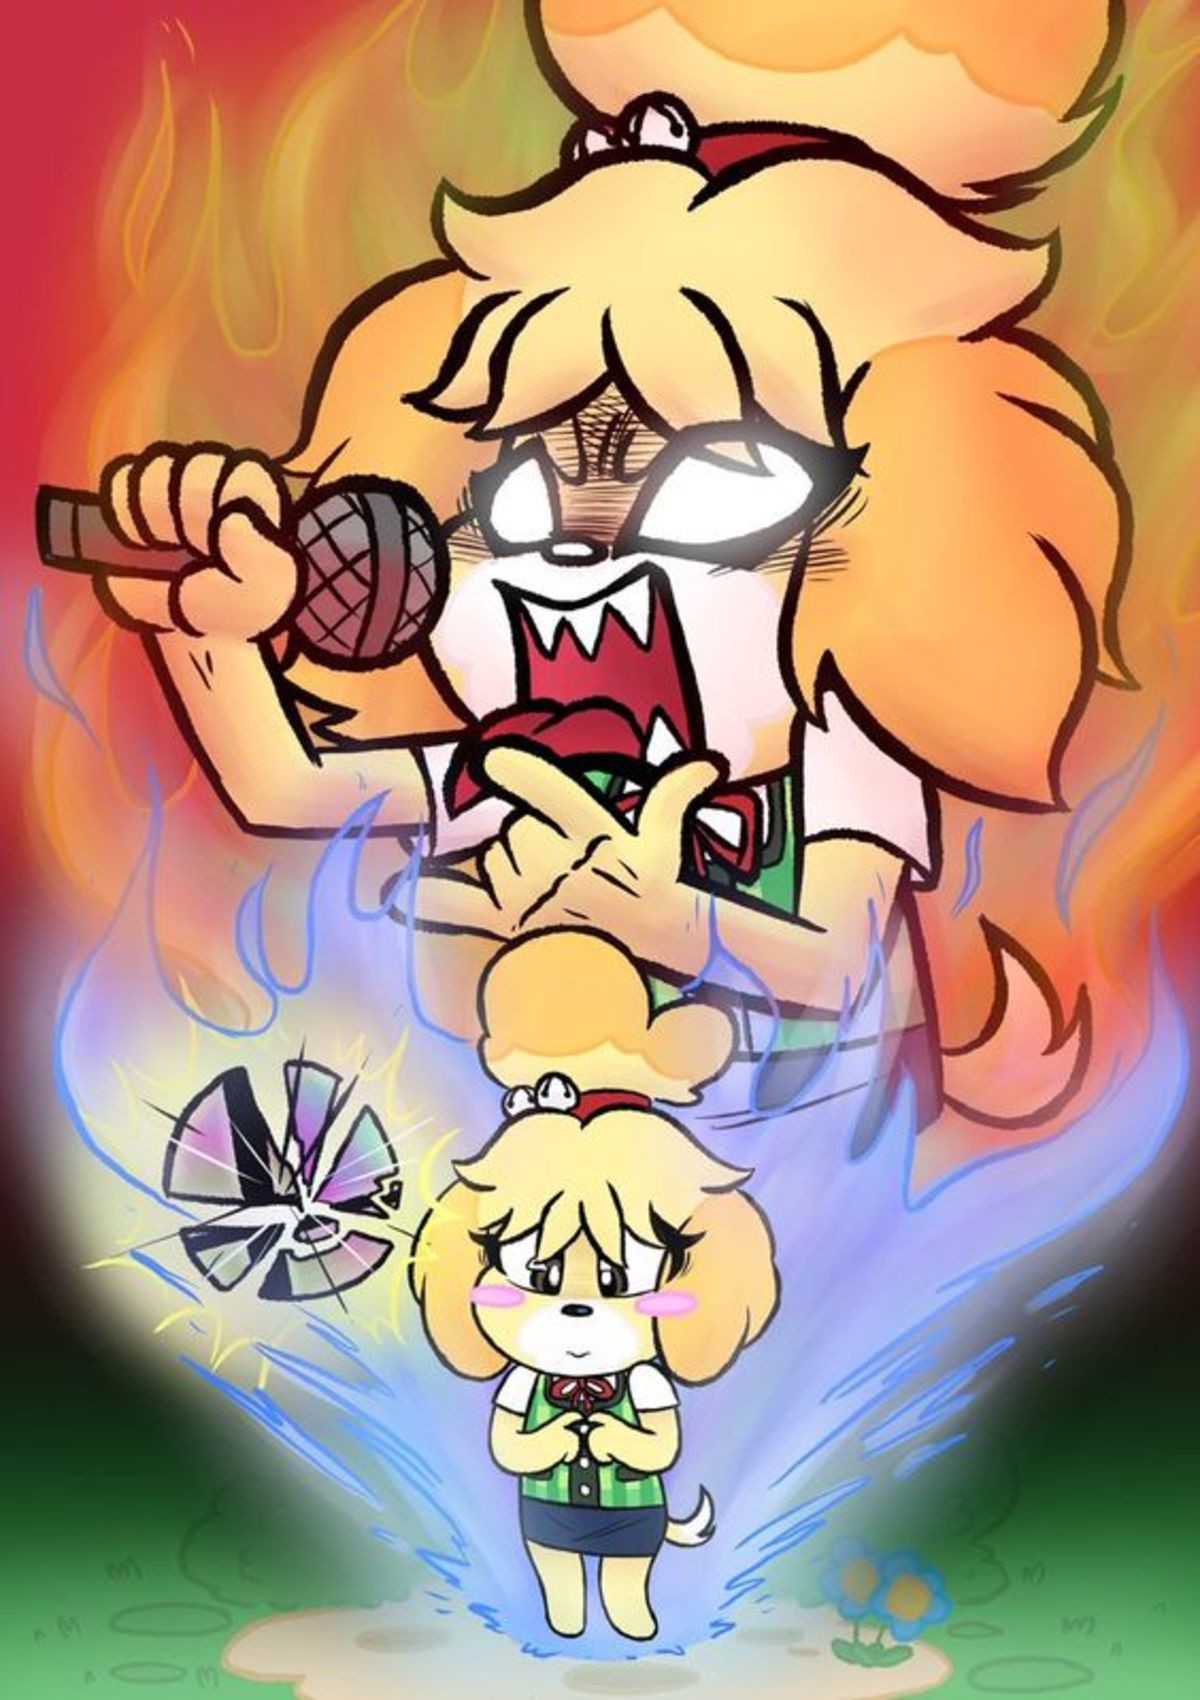 Aggretasabella. .. everyday is protect isabelle day